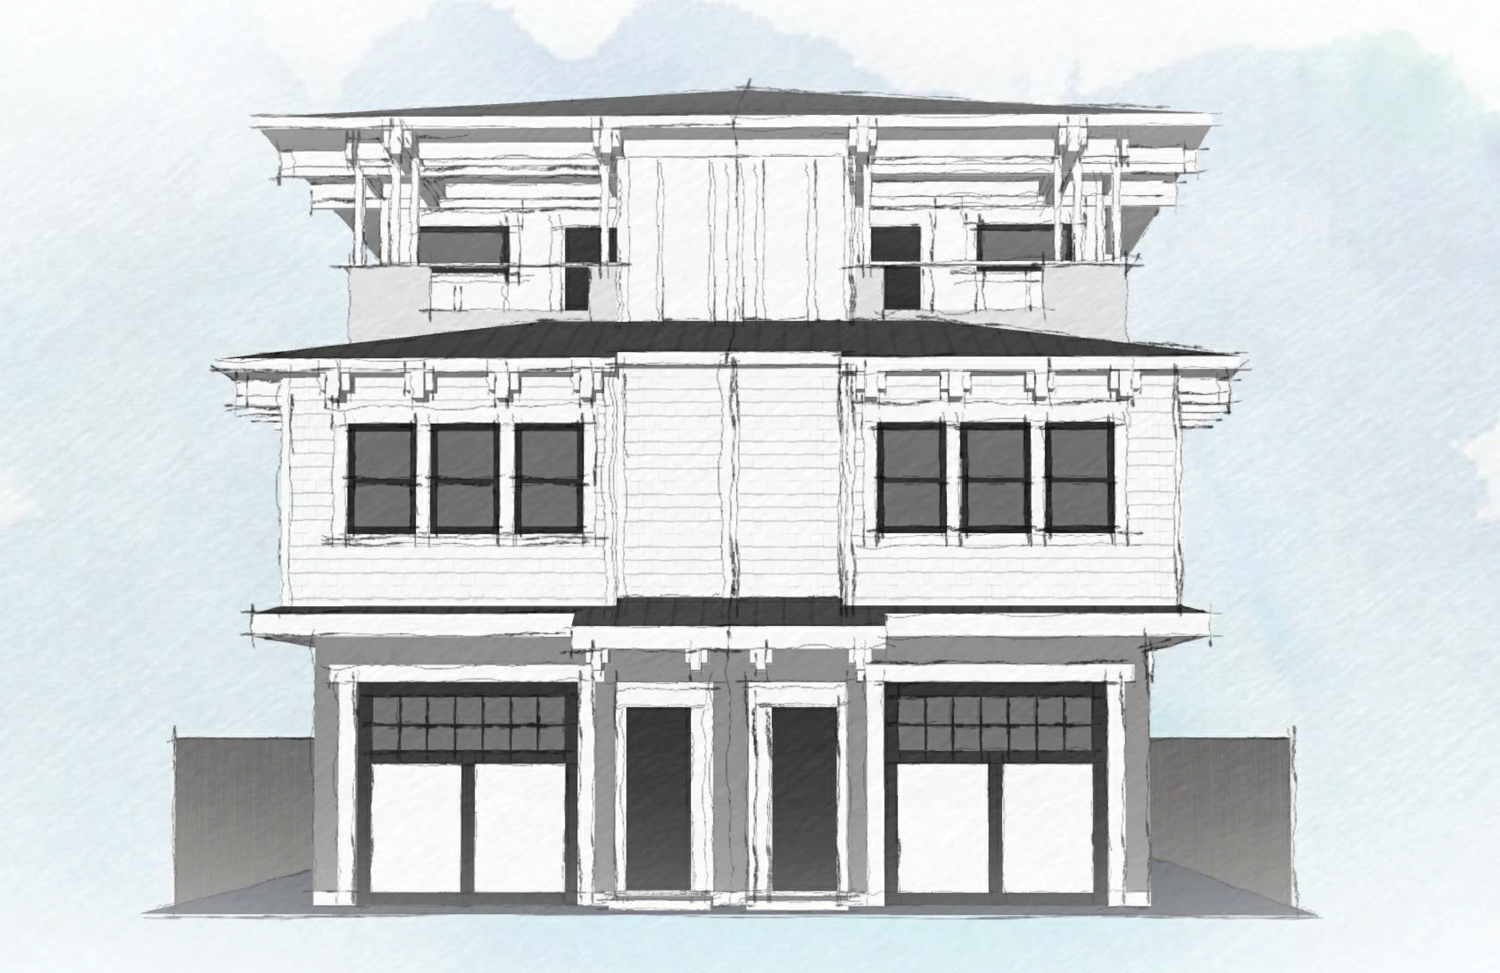 1513 Eggplant Alley and 1515 Eggplant Alley front elevation, rendering by Hausman Architecture